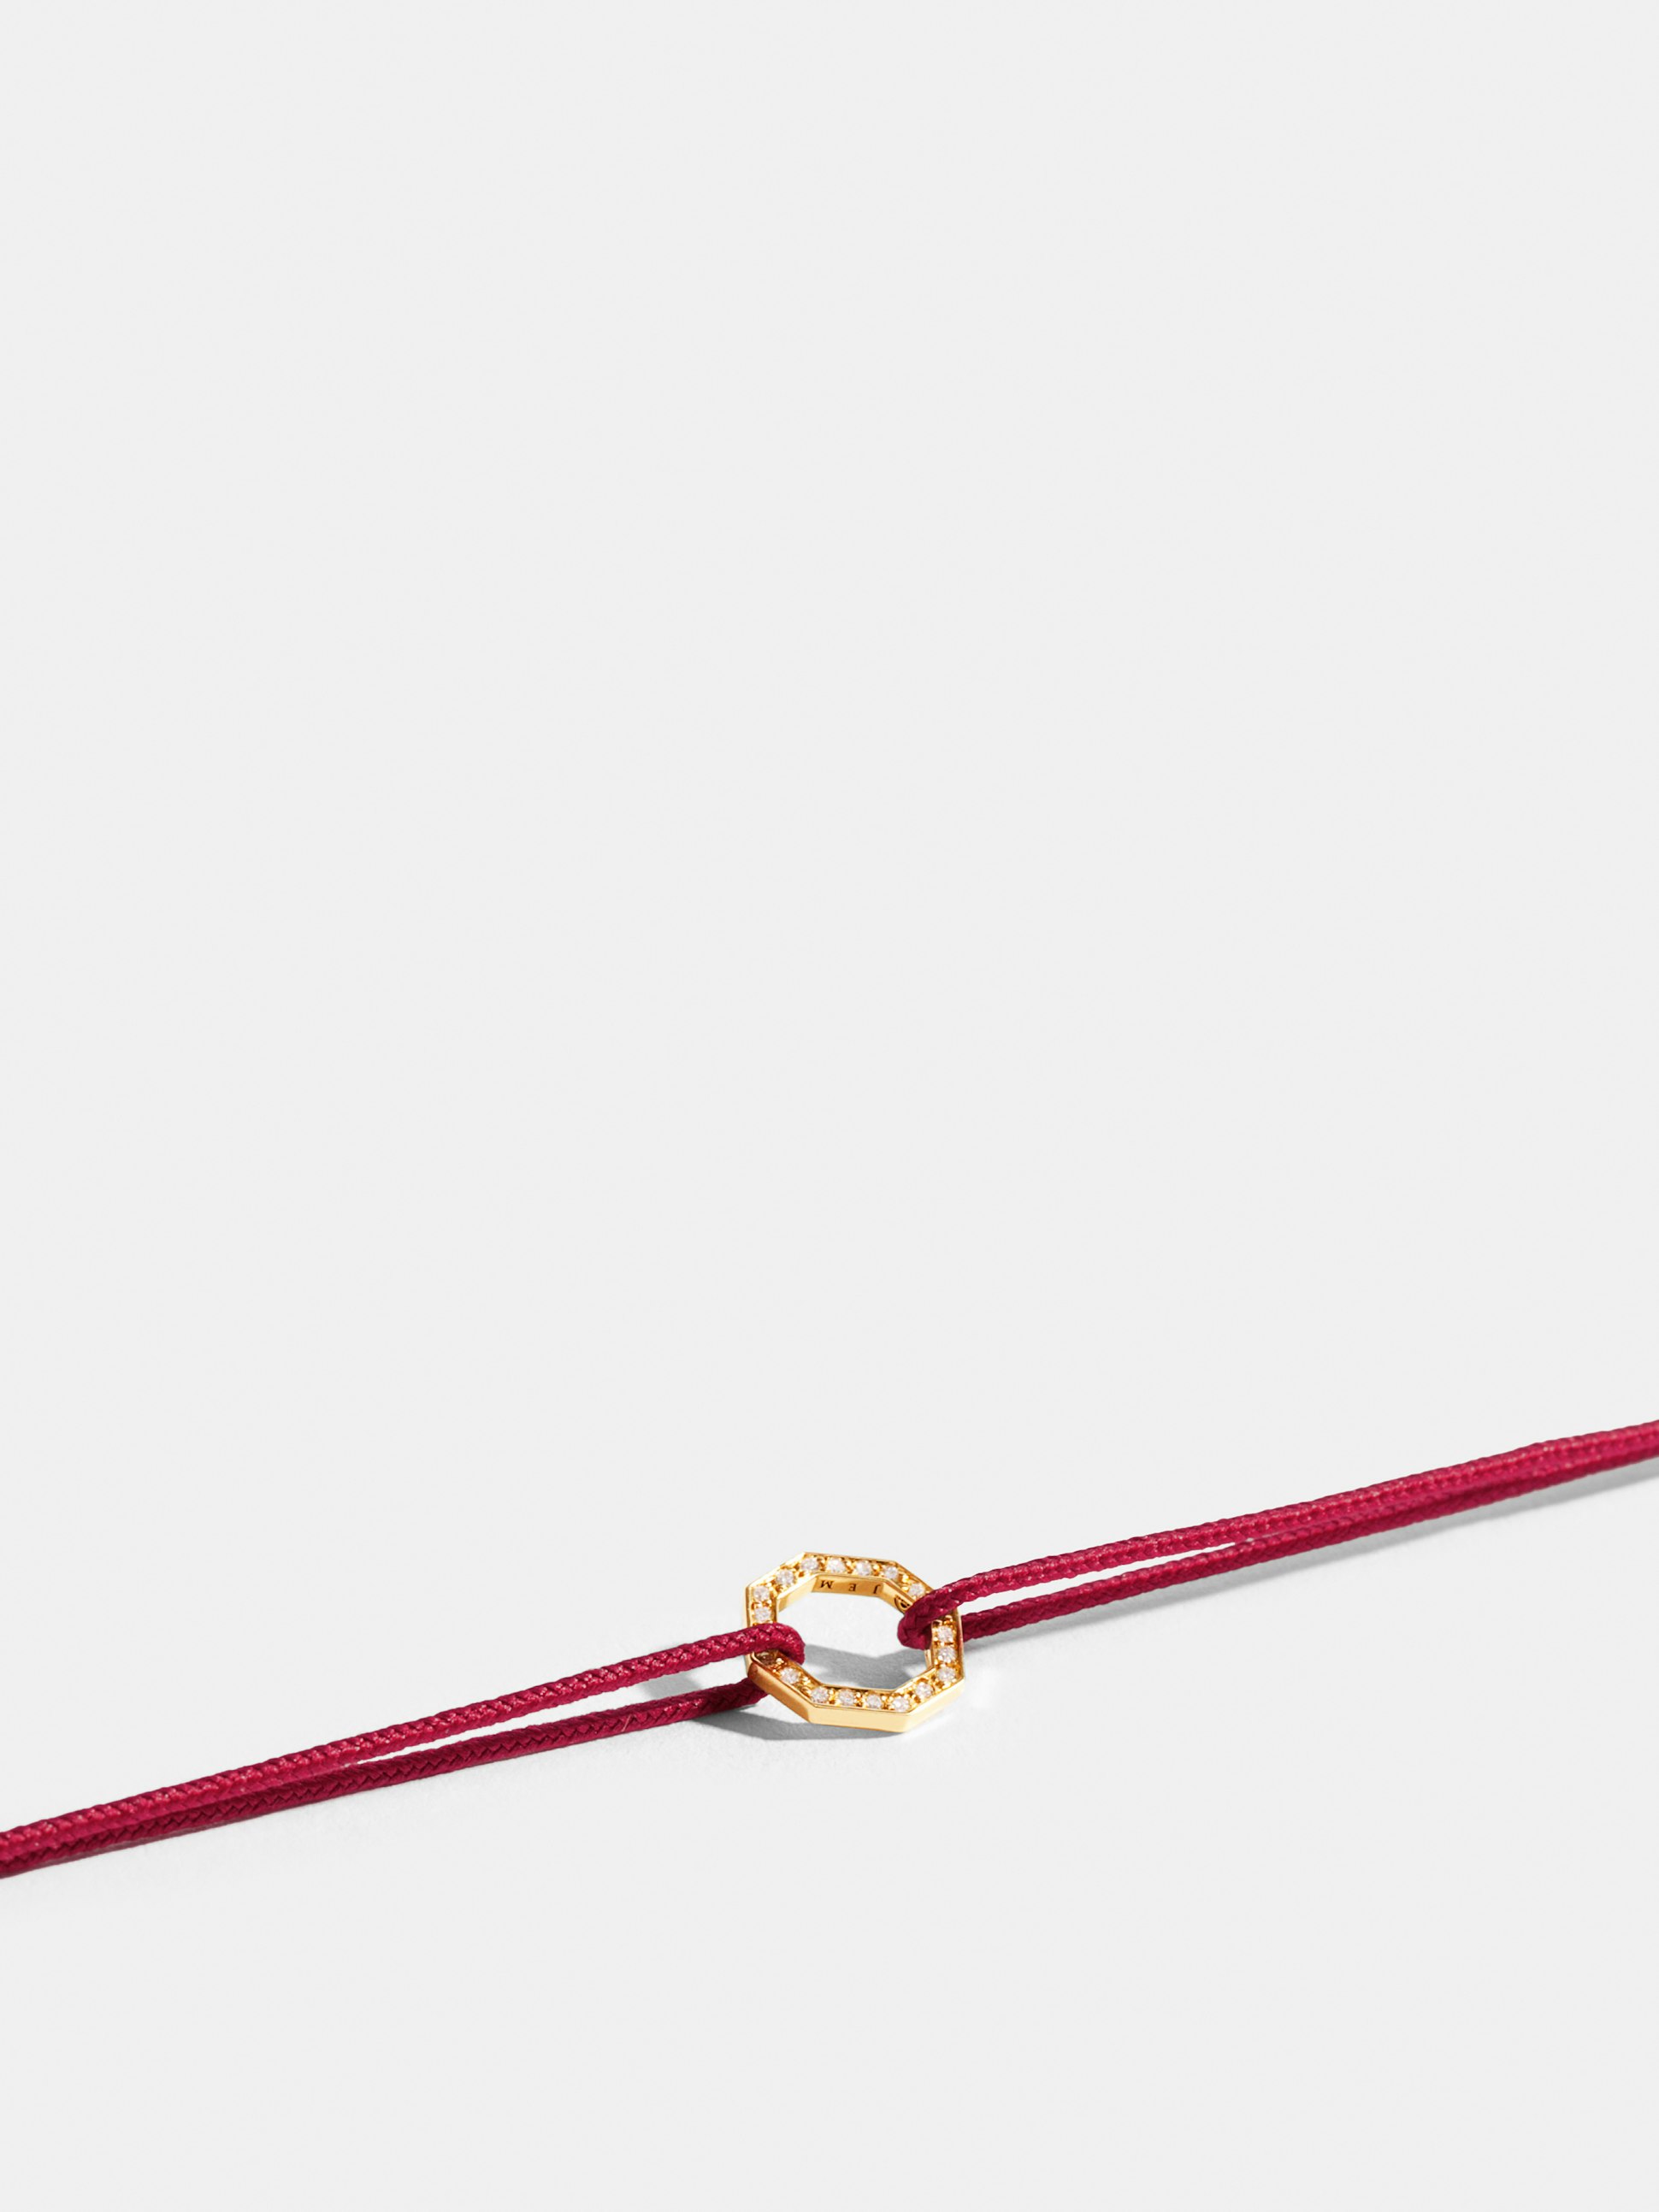 Octogone motif in 18k Fairmined ethical yellow gold, paved with lab-grown diamonds, on a carmine red cord.